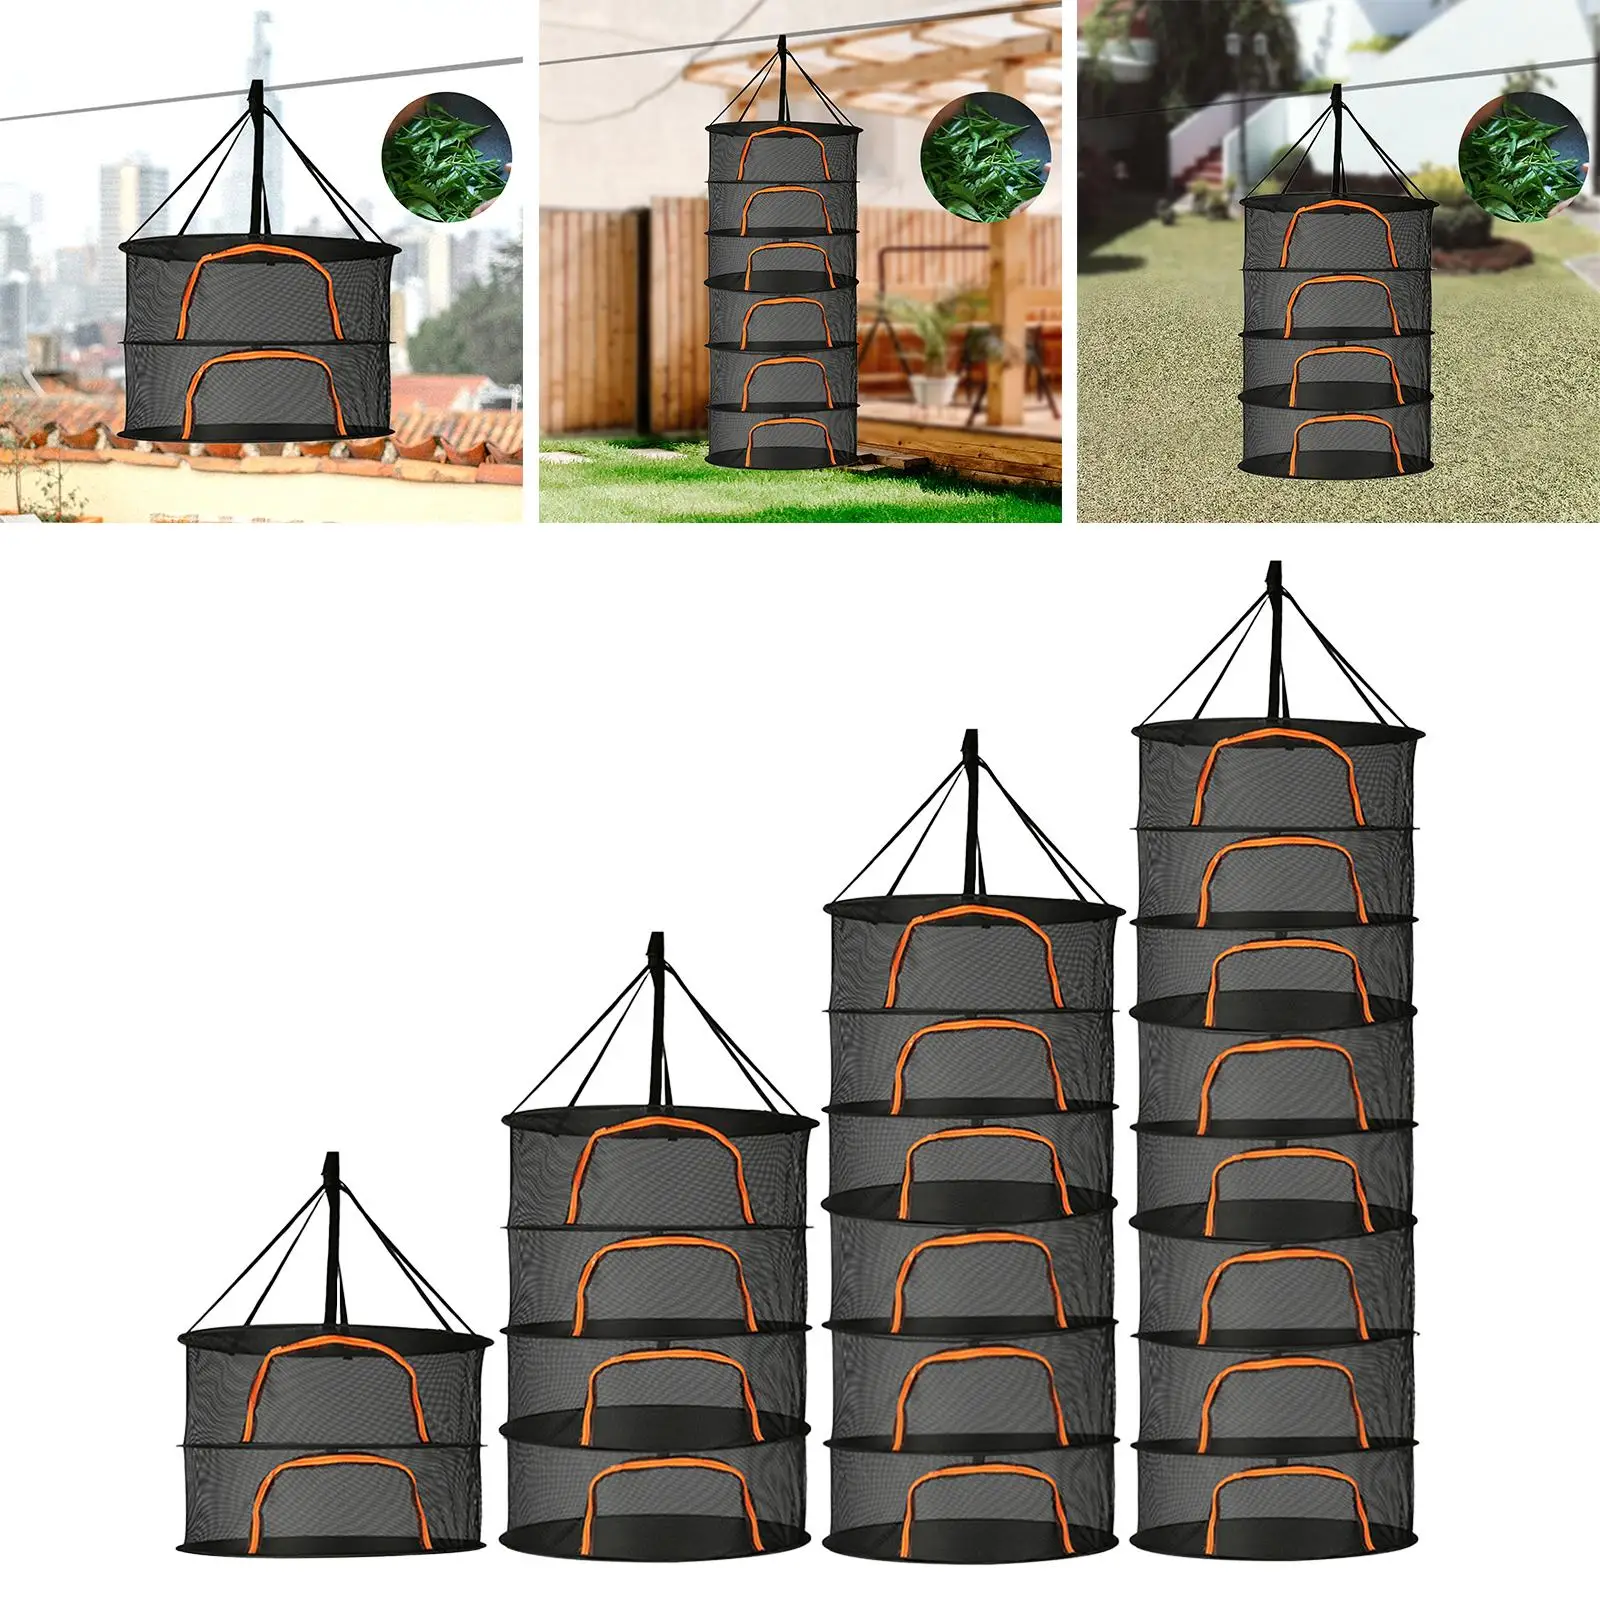 Plants Drying Rack Drying Net/ Breathable Foldable Hanging Drying Fish Net/ Hanging Mesh Dryer for Fish Vegetables Fruits